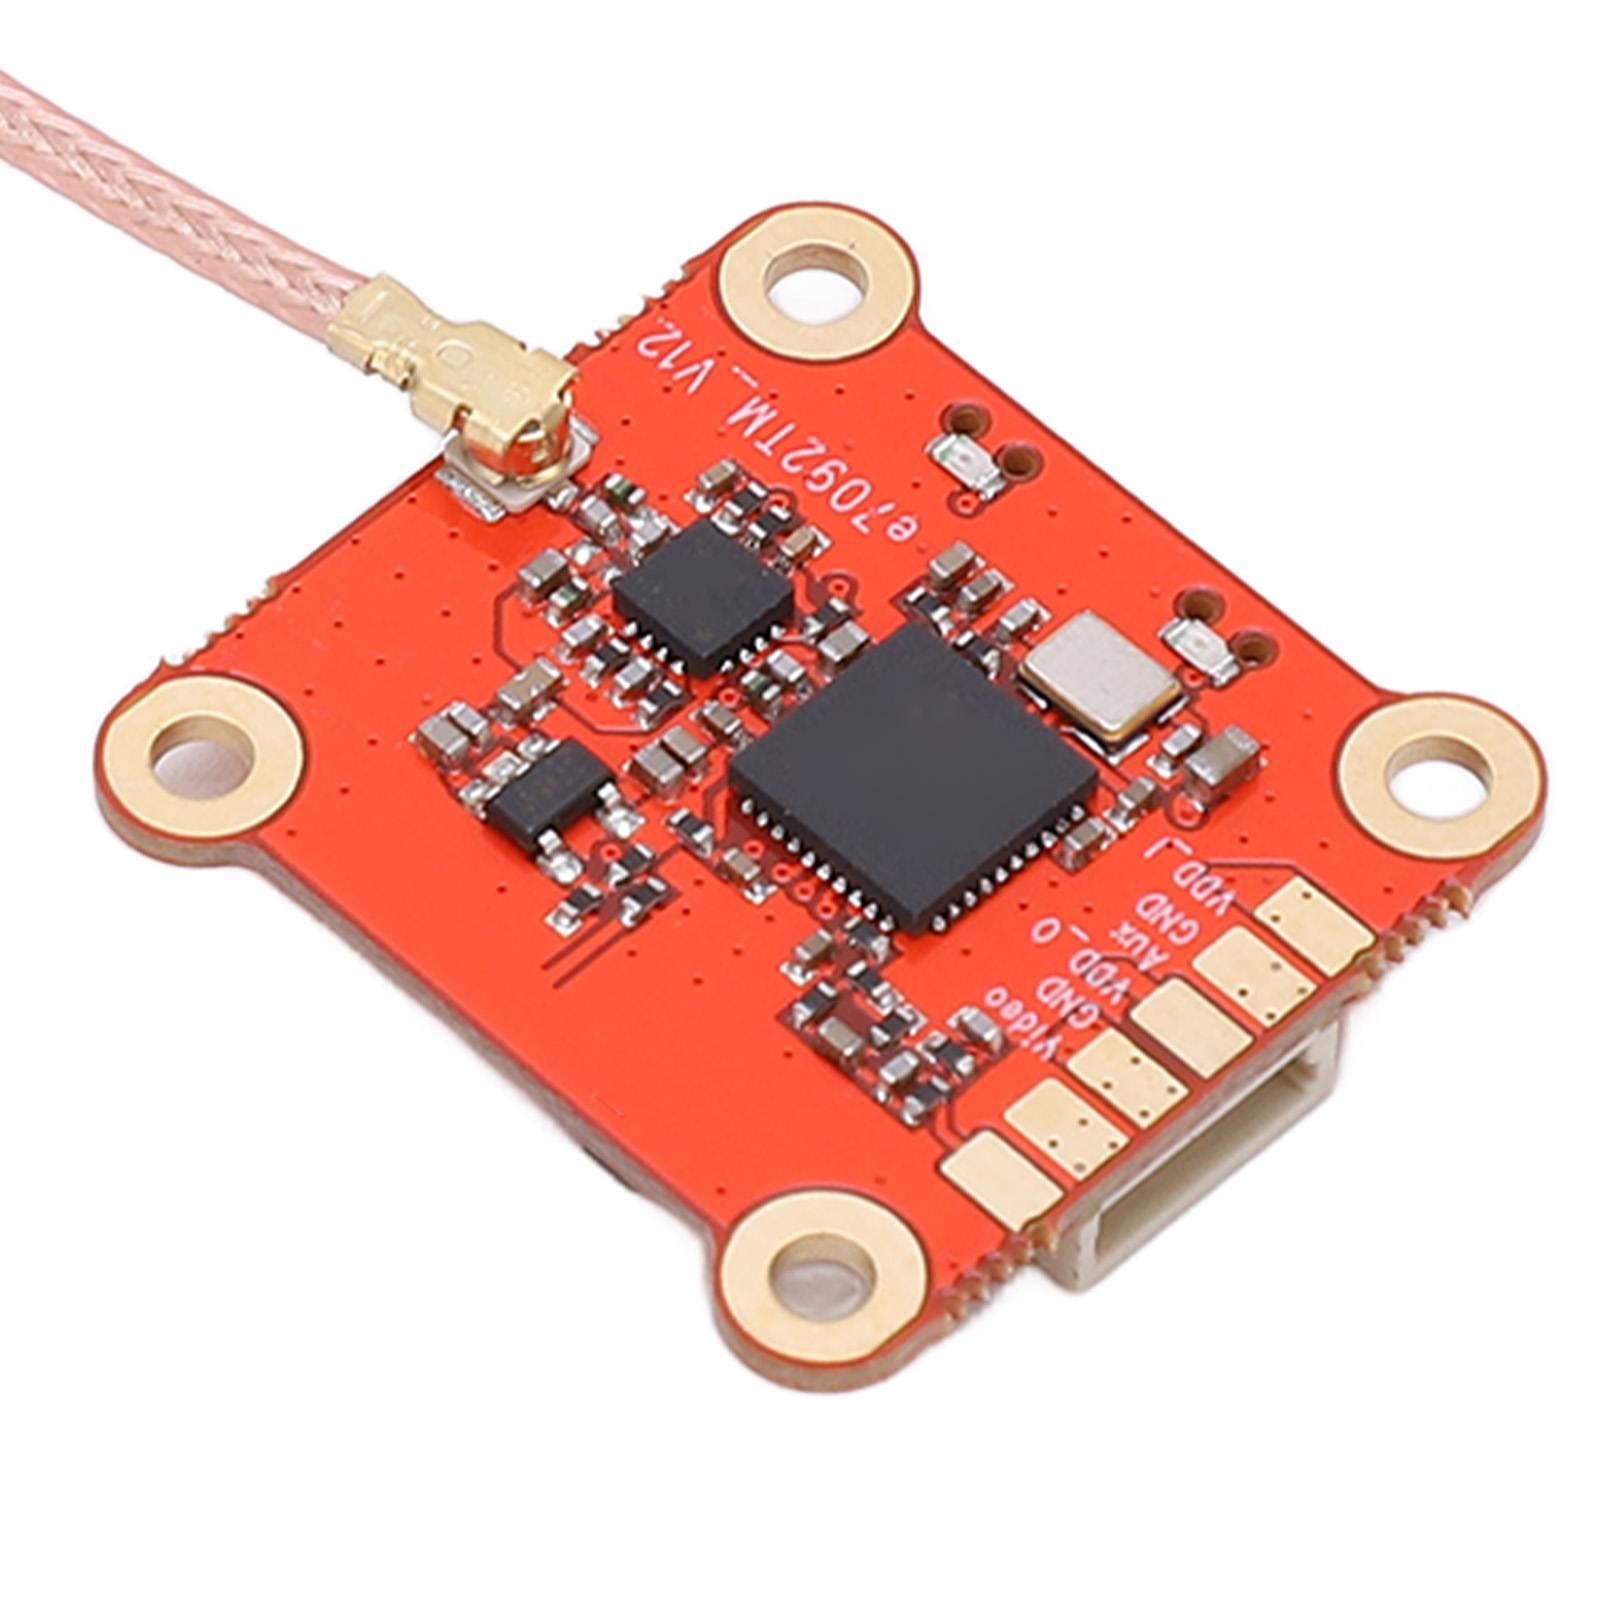 Adjustable Power FPV Transmitter for Racing Drones